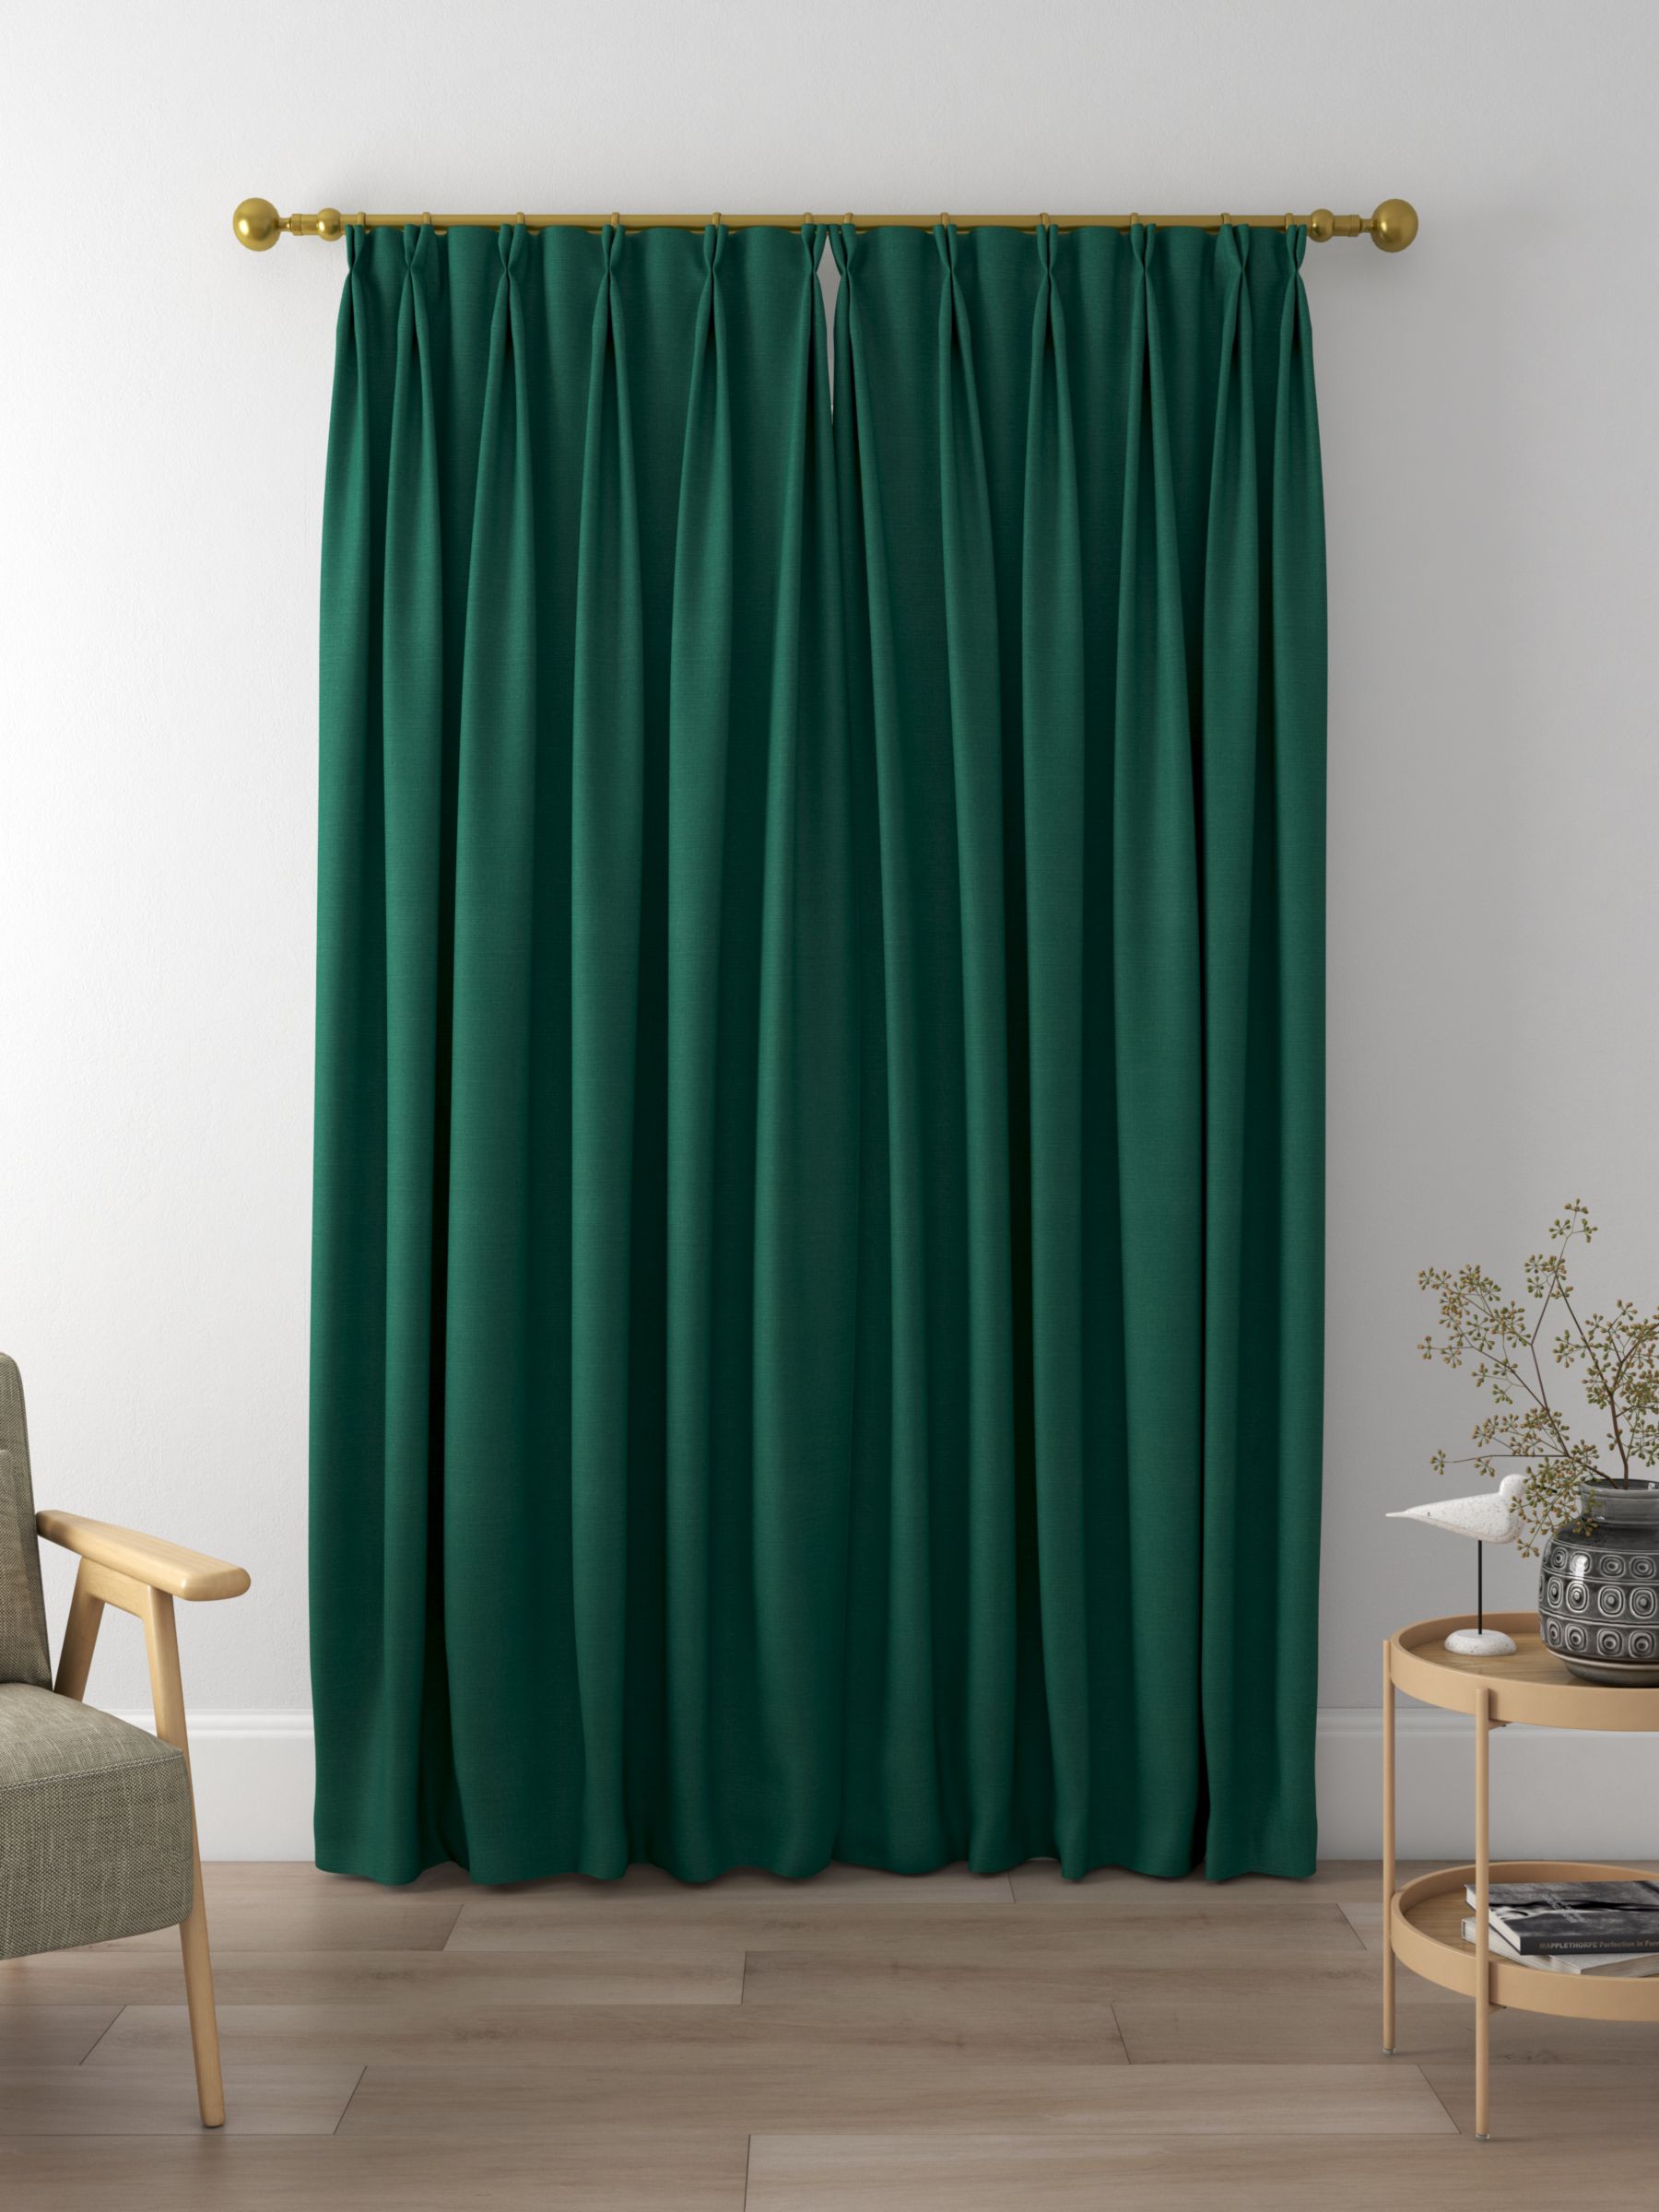 Sanderson Tuscany II Made to Measure Curtains, Fern